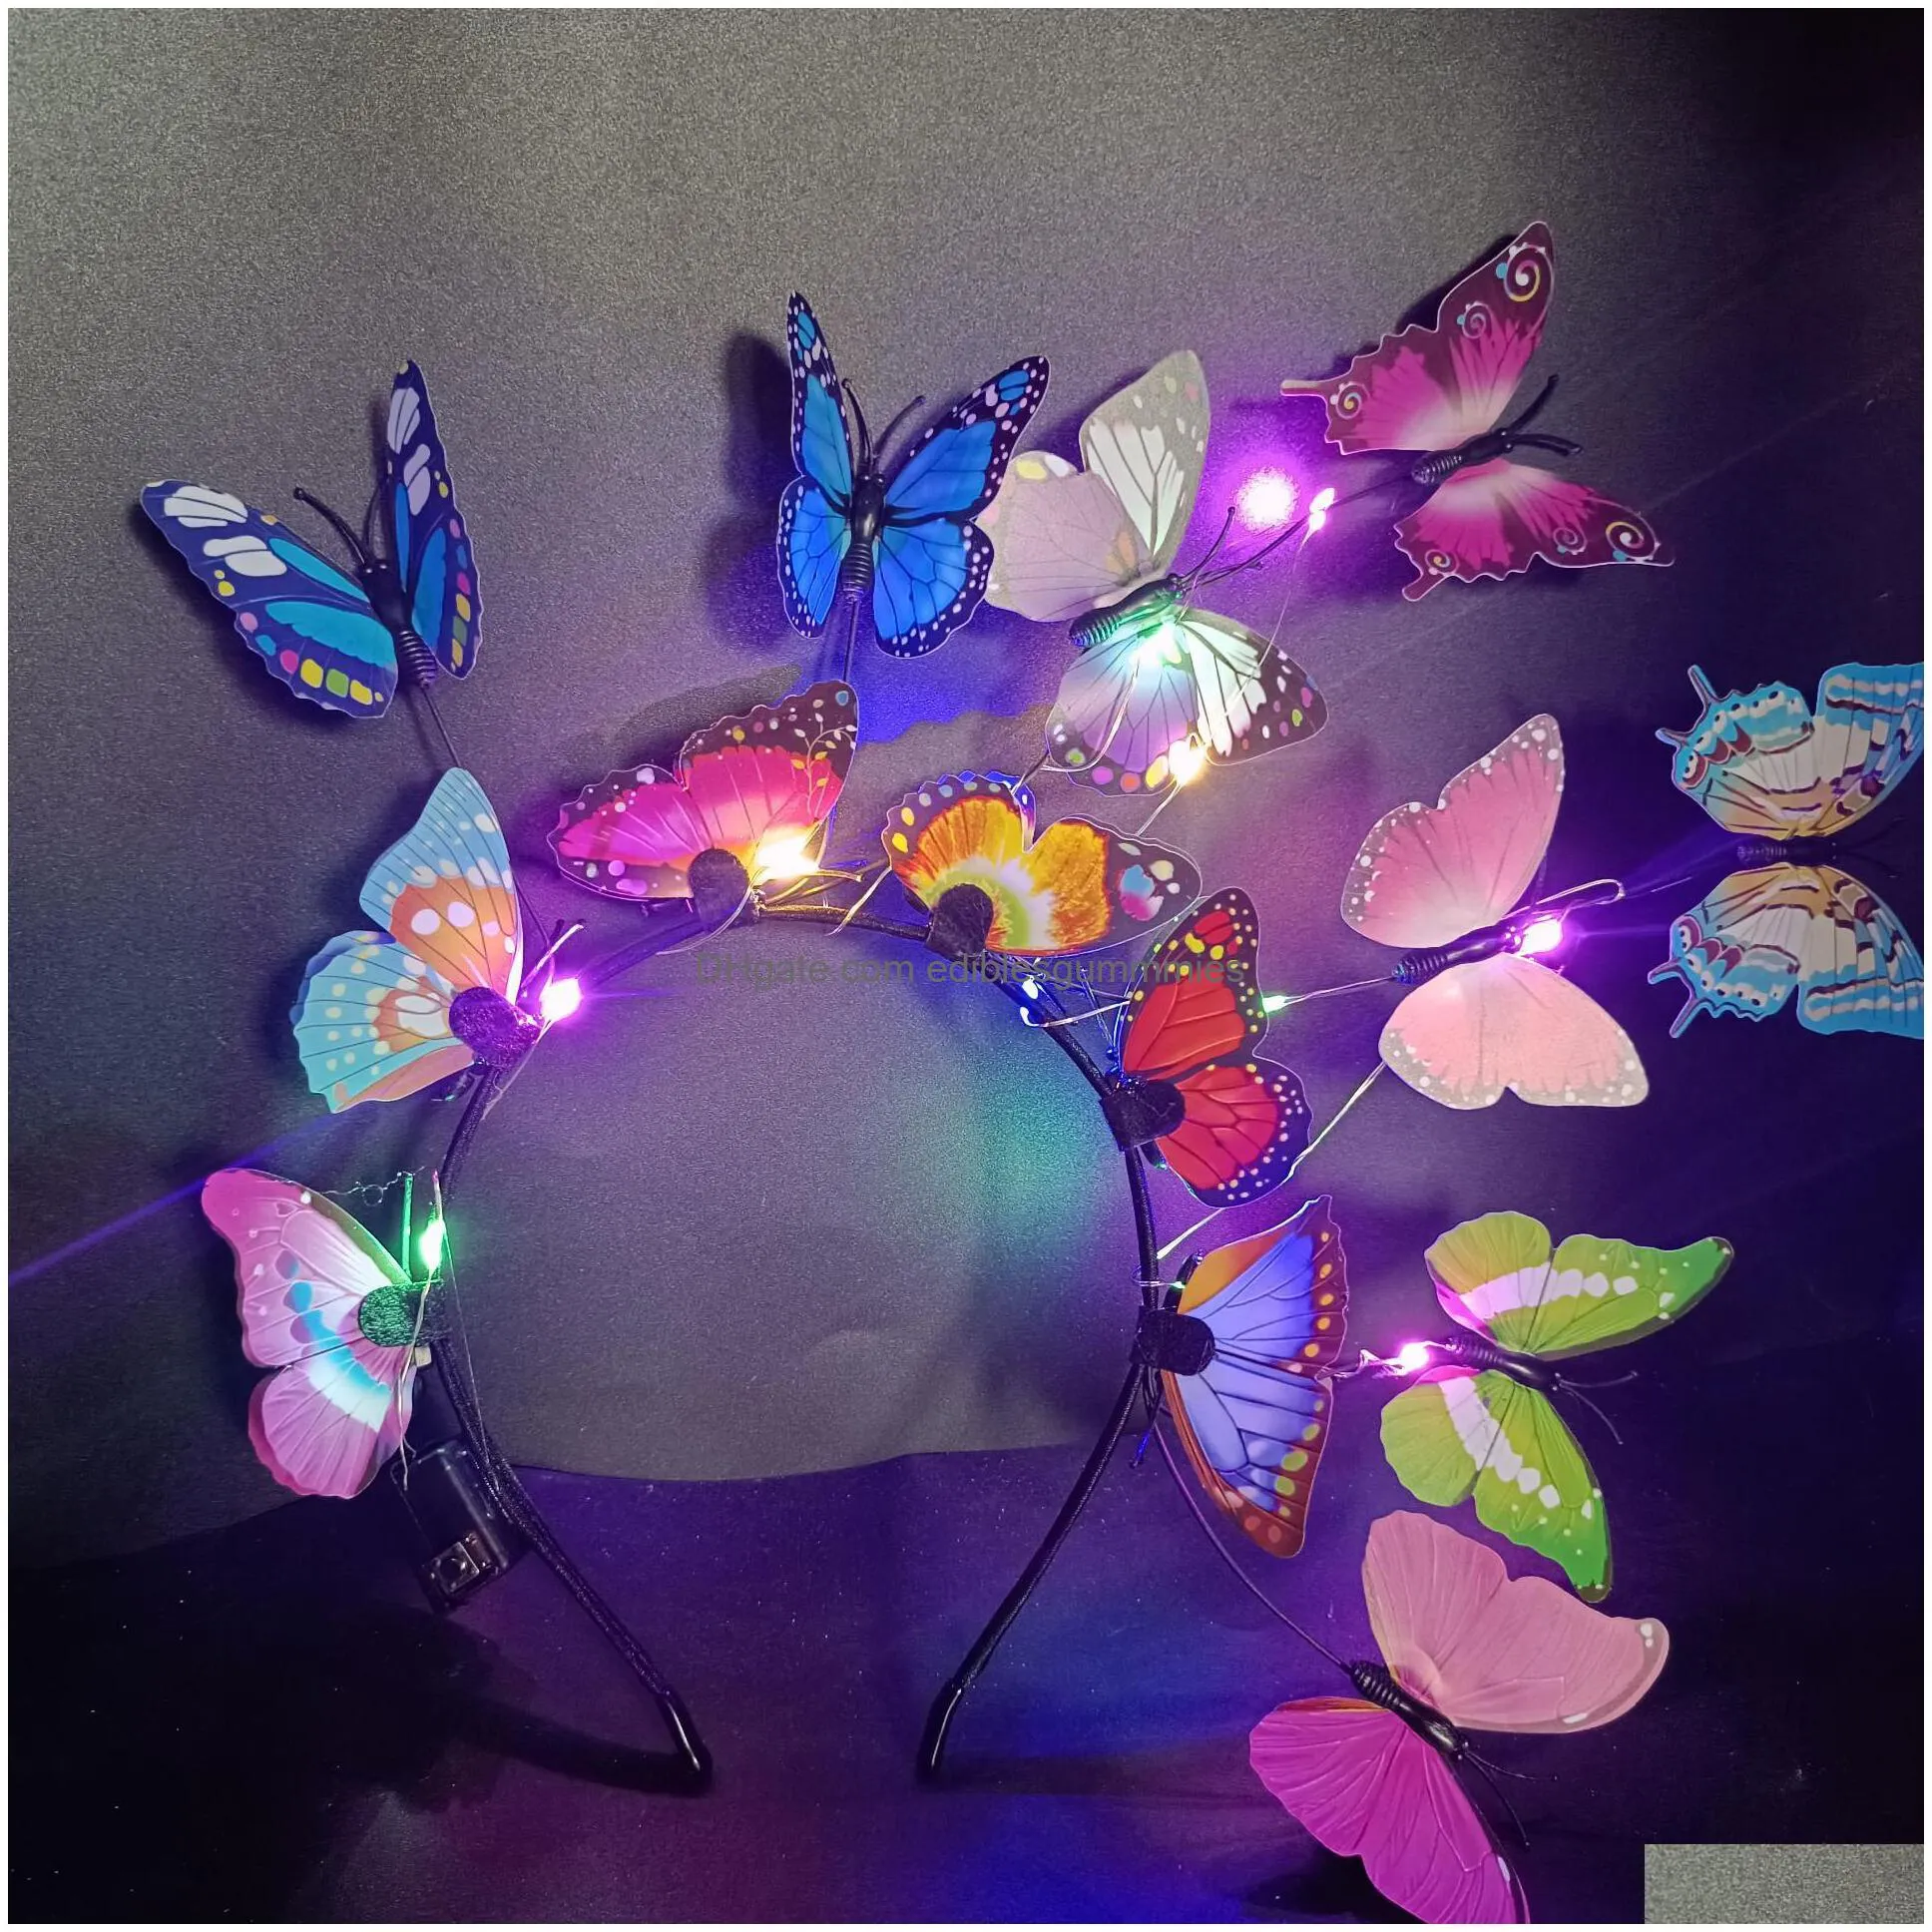 Other Event Party Supplies Glowing Butterfly Headband With Led Lights Baby Shower Birthday Decorations Girls Hairbands Wedding Brid Dh8Ou